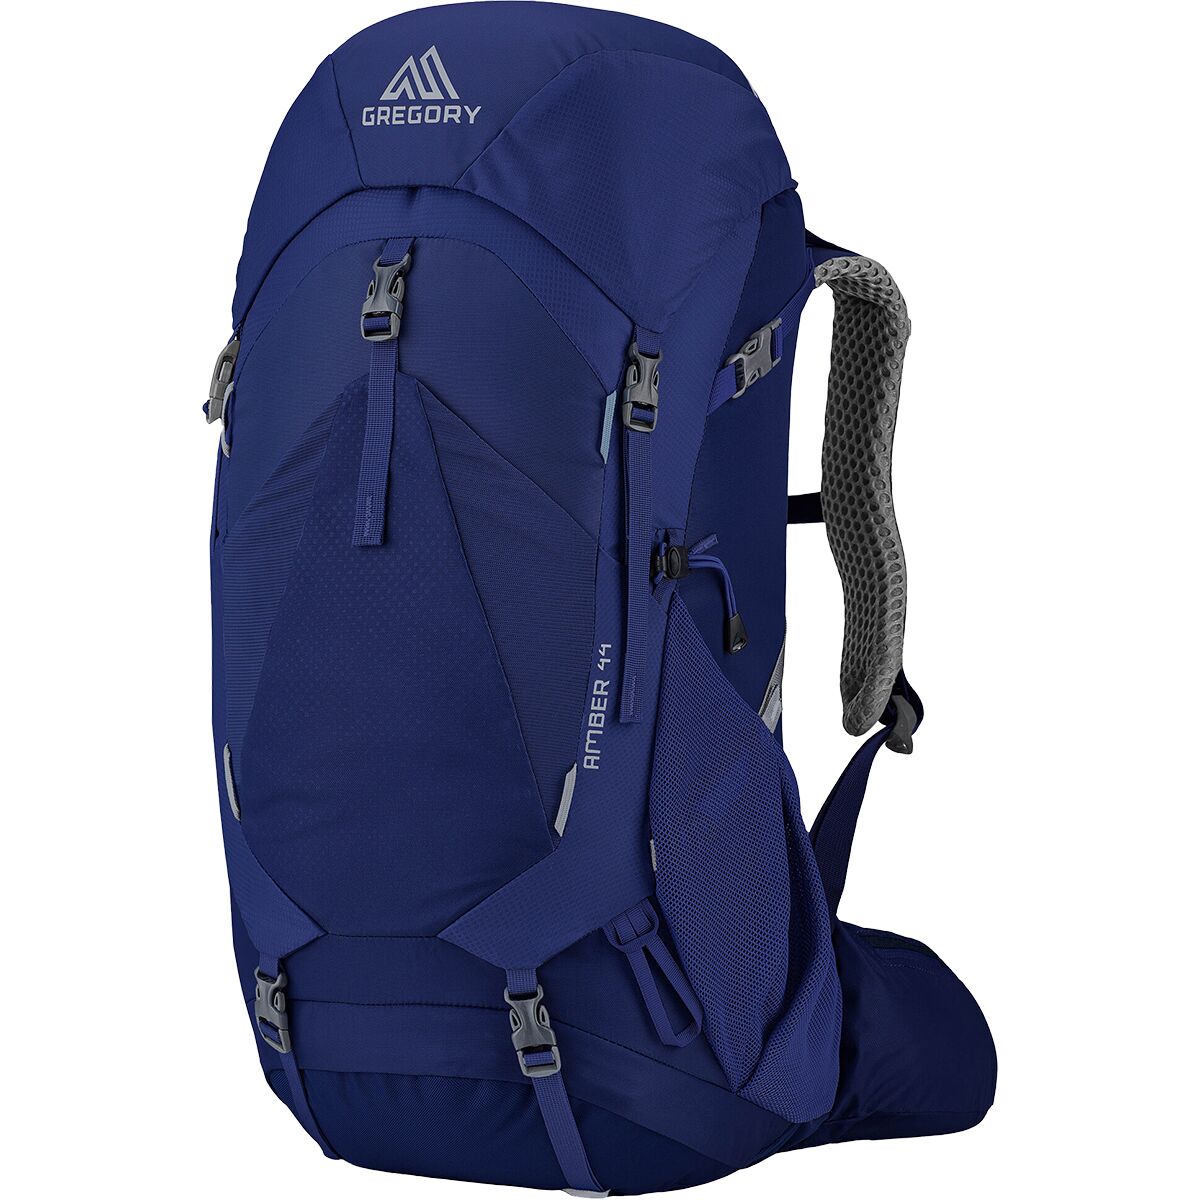 Gregory Amber 44L Backpack - Women's